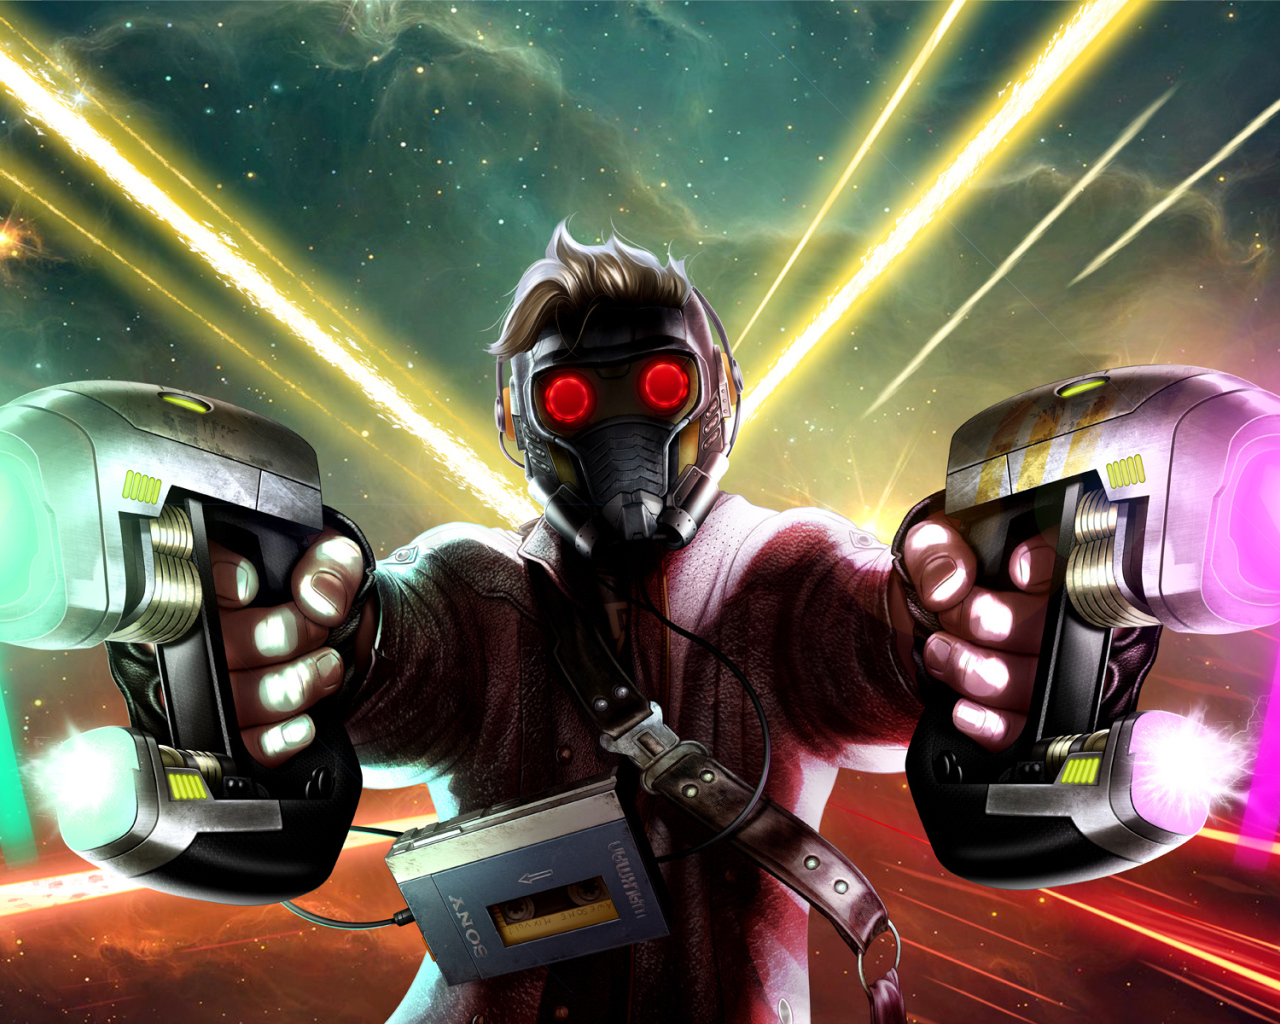 Star Lord with weapons art